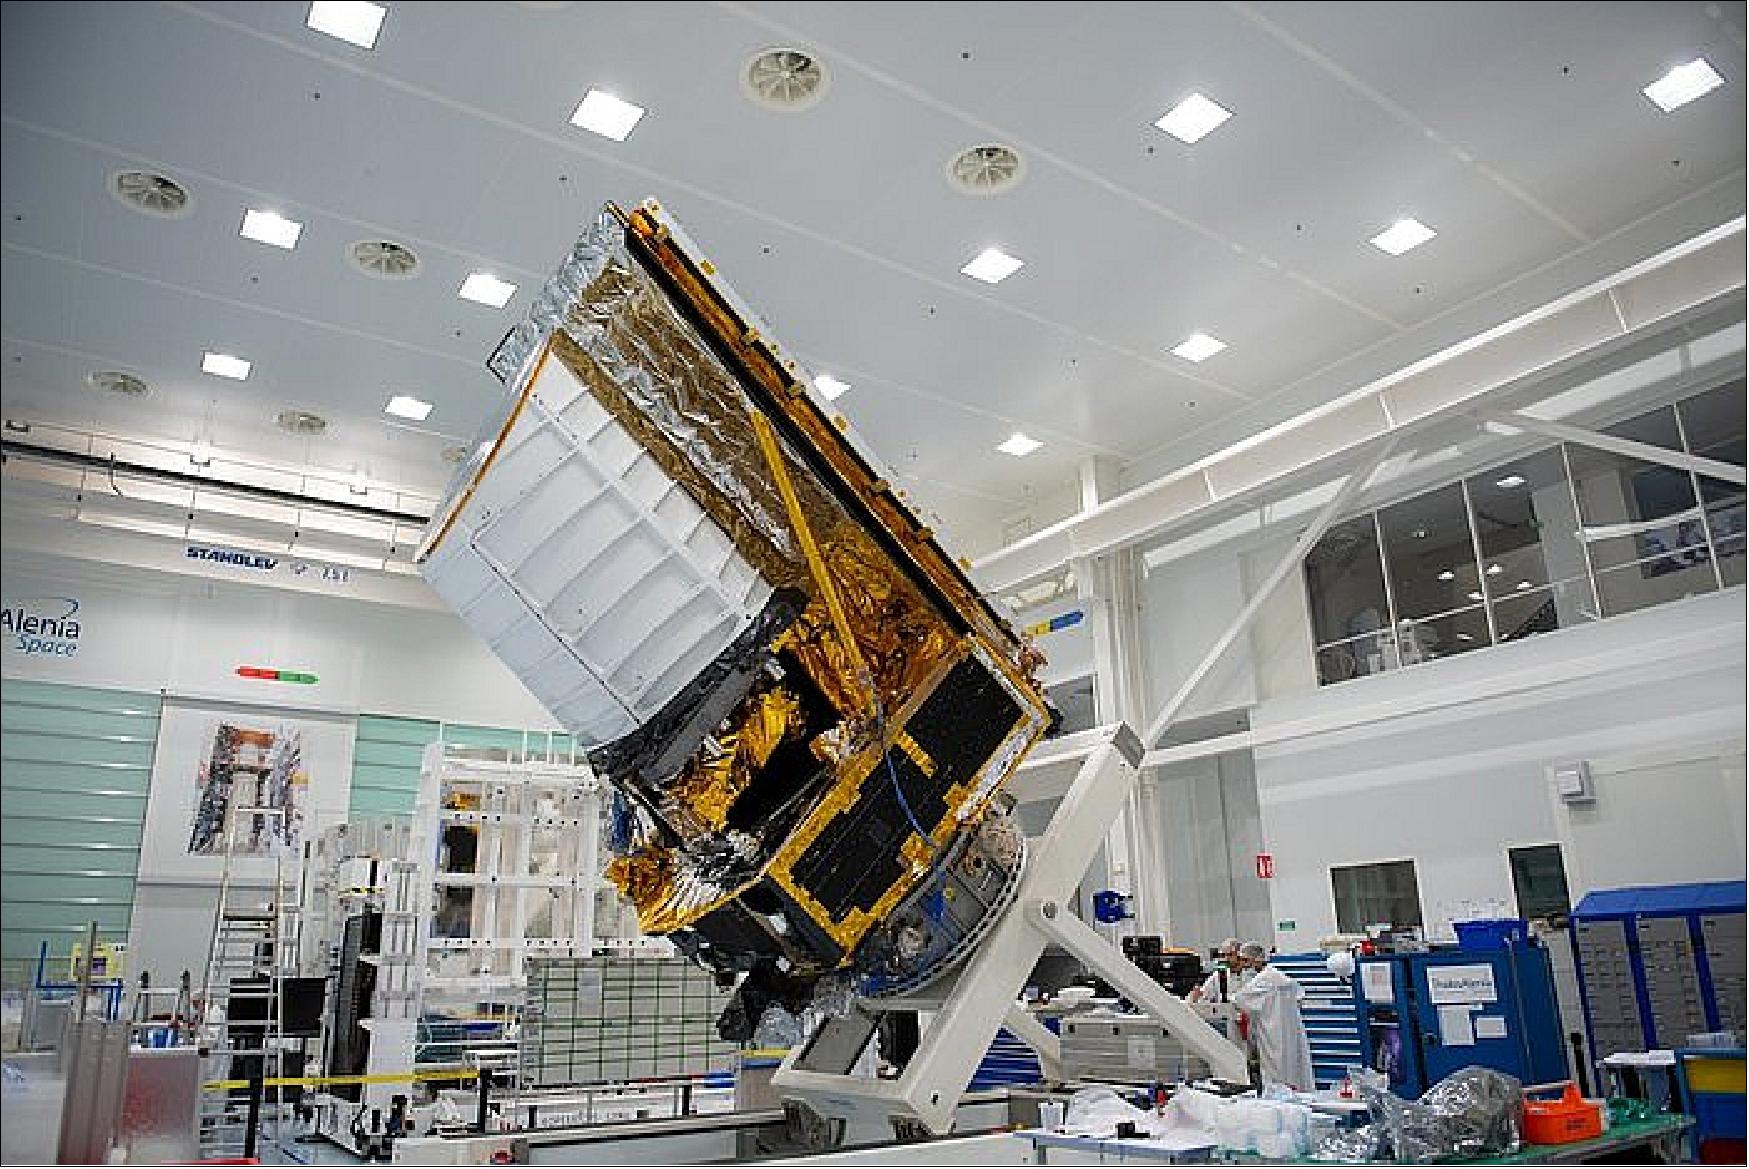 Figure 36: Structural and thermal model of the Euclid satellite. The structural and thermal model of the Euclid satellite recently completed its thermal qualification tests at Thales Alenia Space’s premises in Cannes, France. Integrated in near-flight configuration, including the payload and service modules, the satellite model is ready to undergo mechanical vibration tests in coming weeks (image credit: ESA, S. Corvaja)